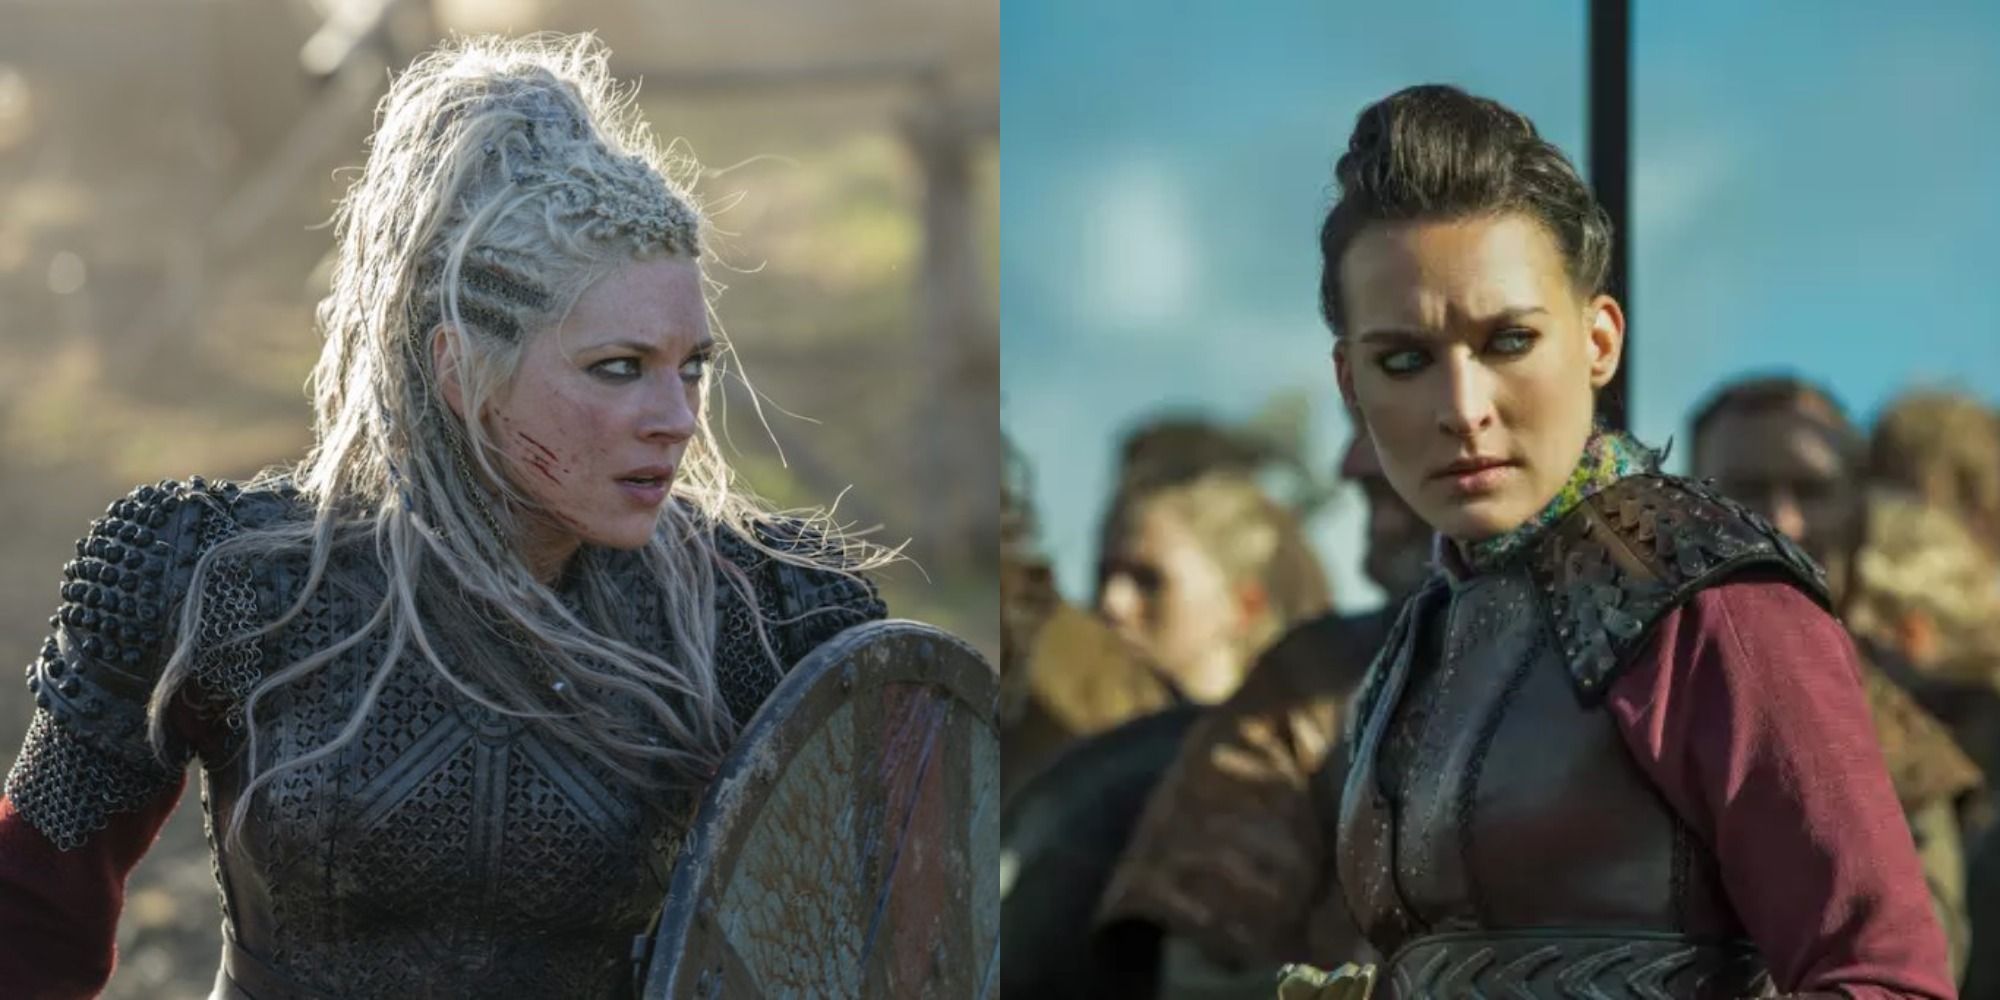 The 10 Best Female Characters From Vikings & Vikings Valhalla